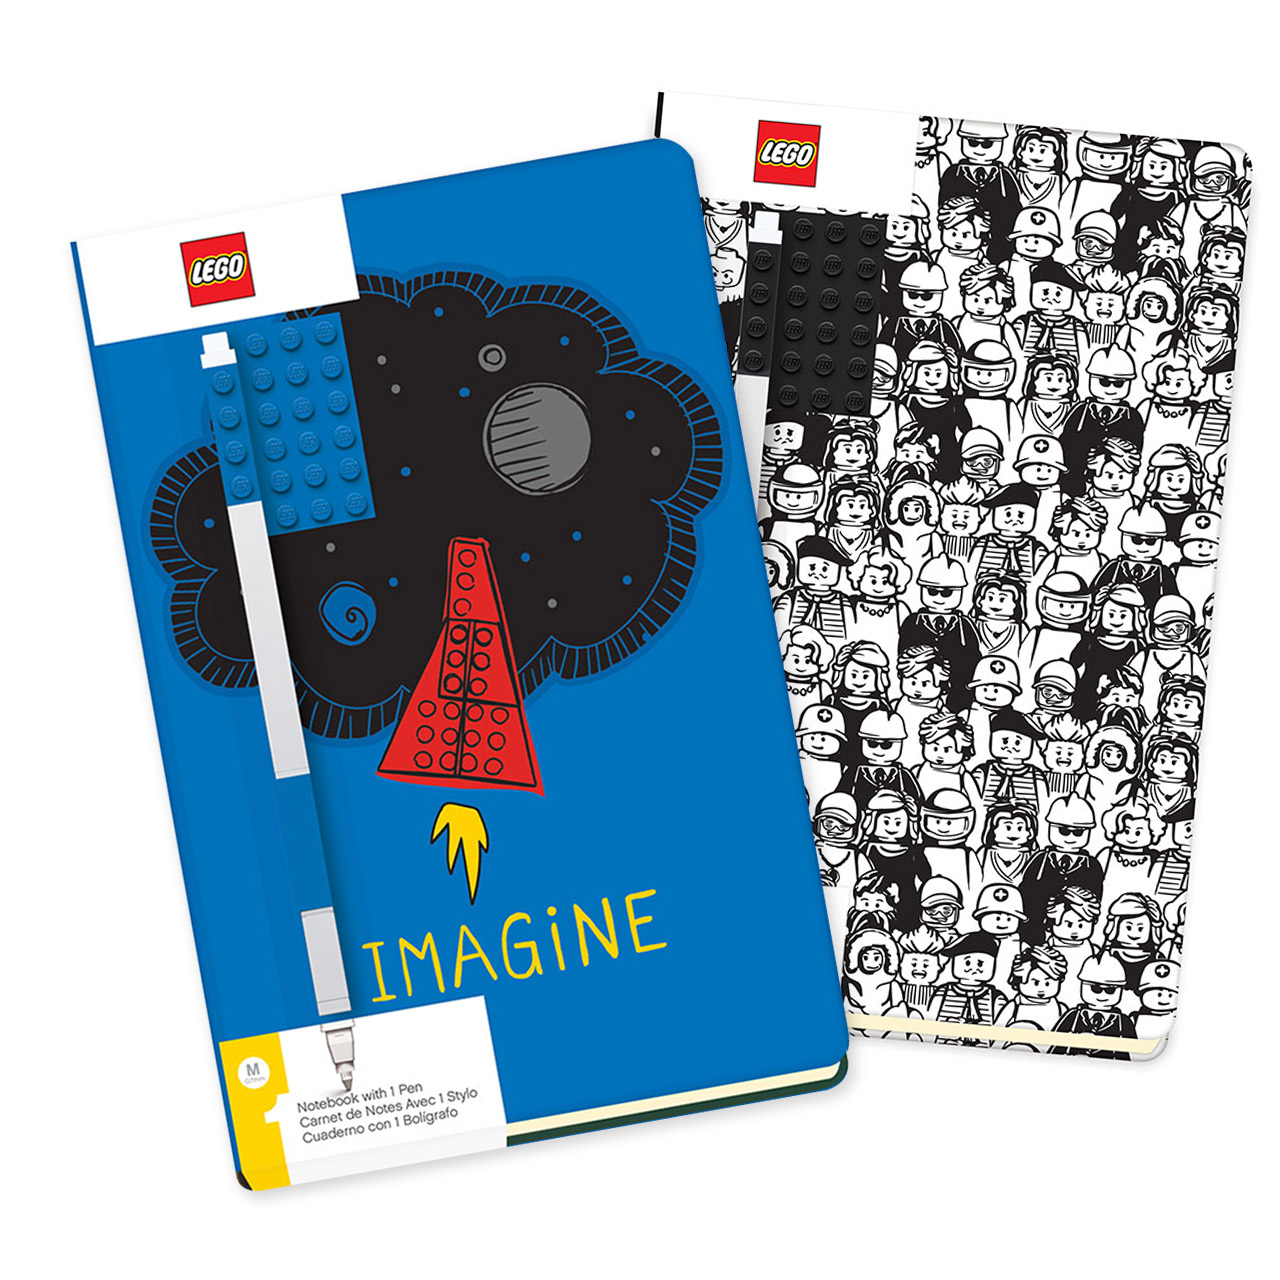 LEGO A5 JOURNAL WITH PEN BLACK AND WHITE DESIGN - alternative